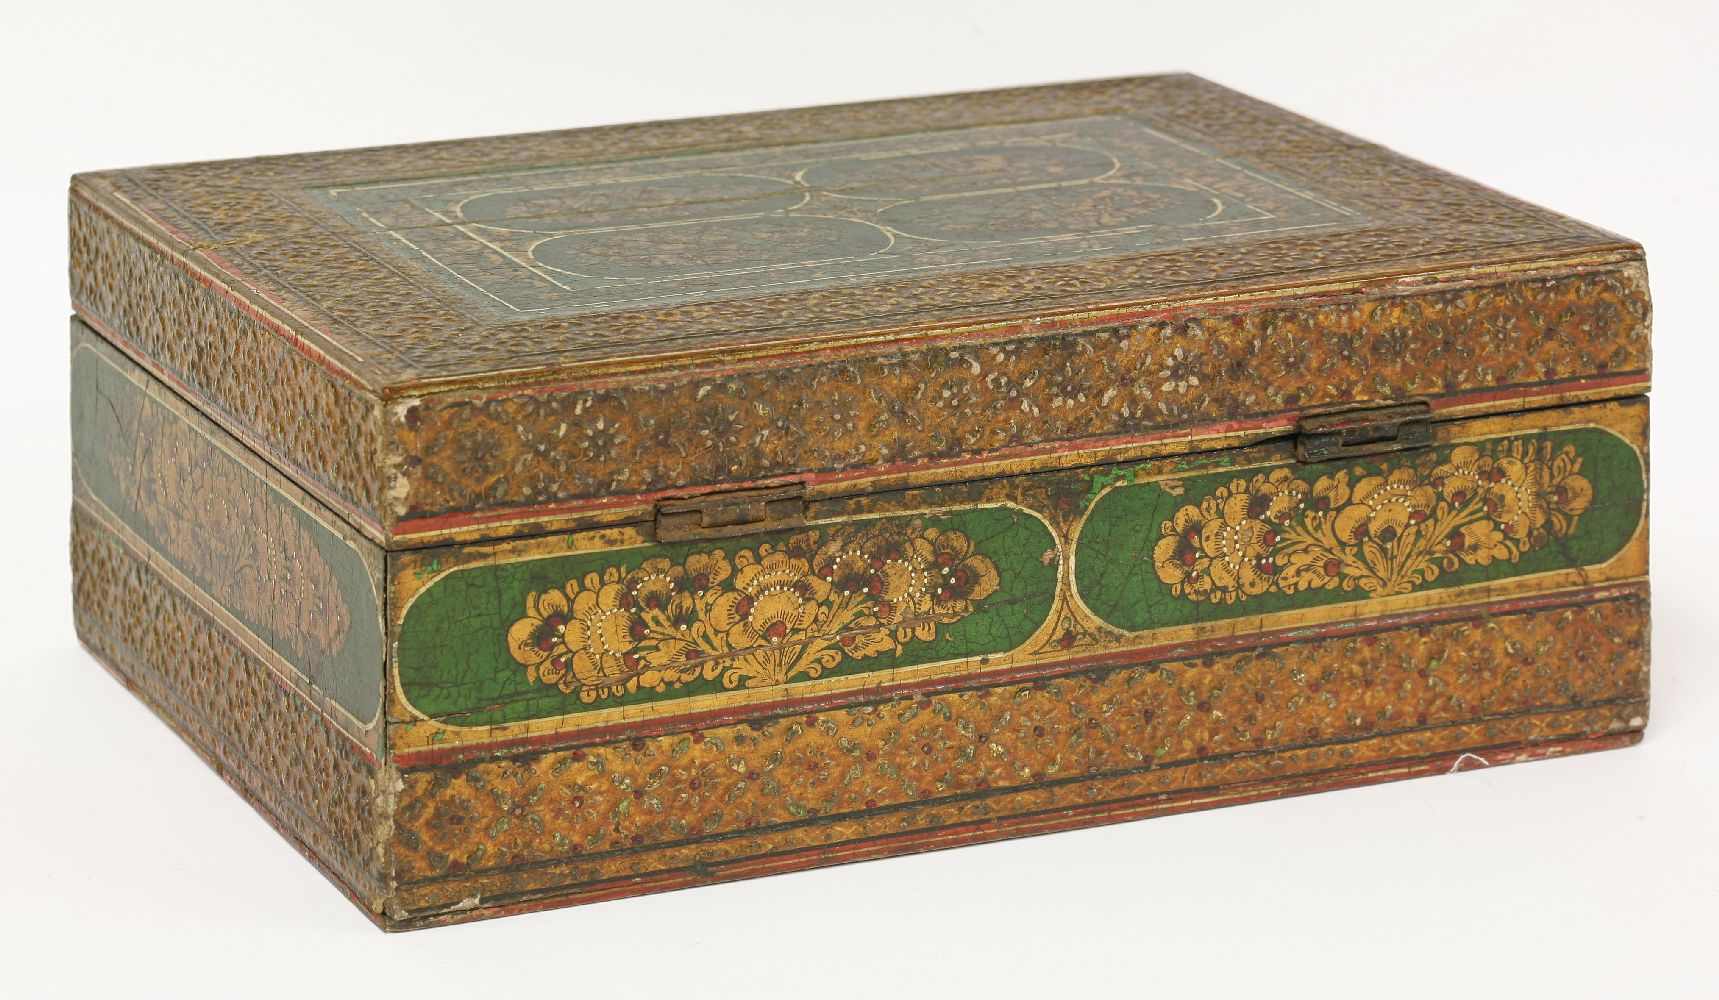 An Indian box,late 19th century, with green and gilt painted decoration within floral moulded - Image 2 of 3